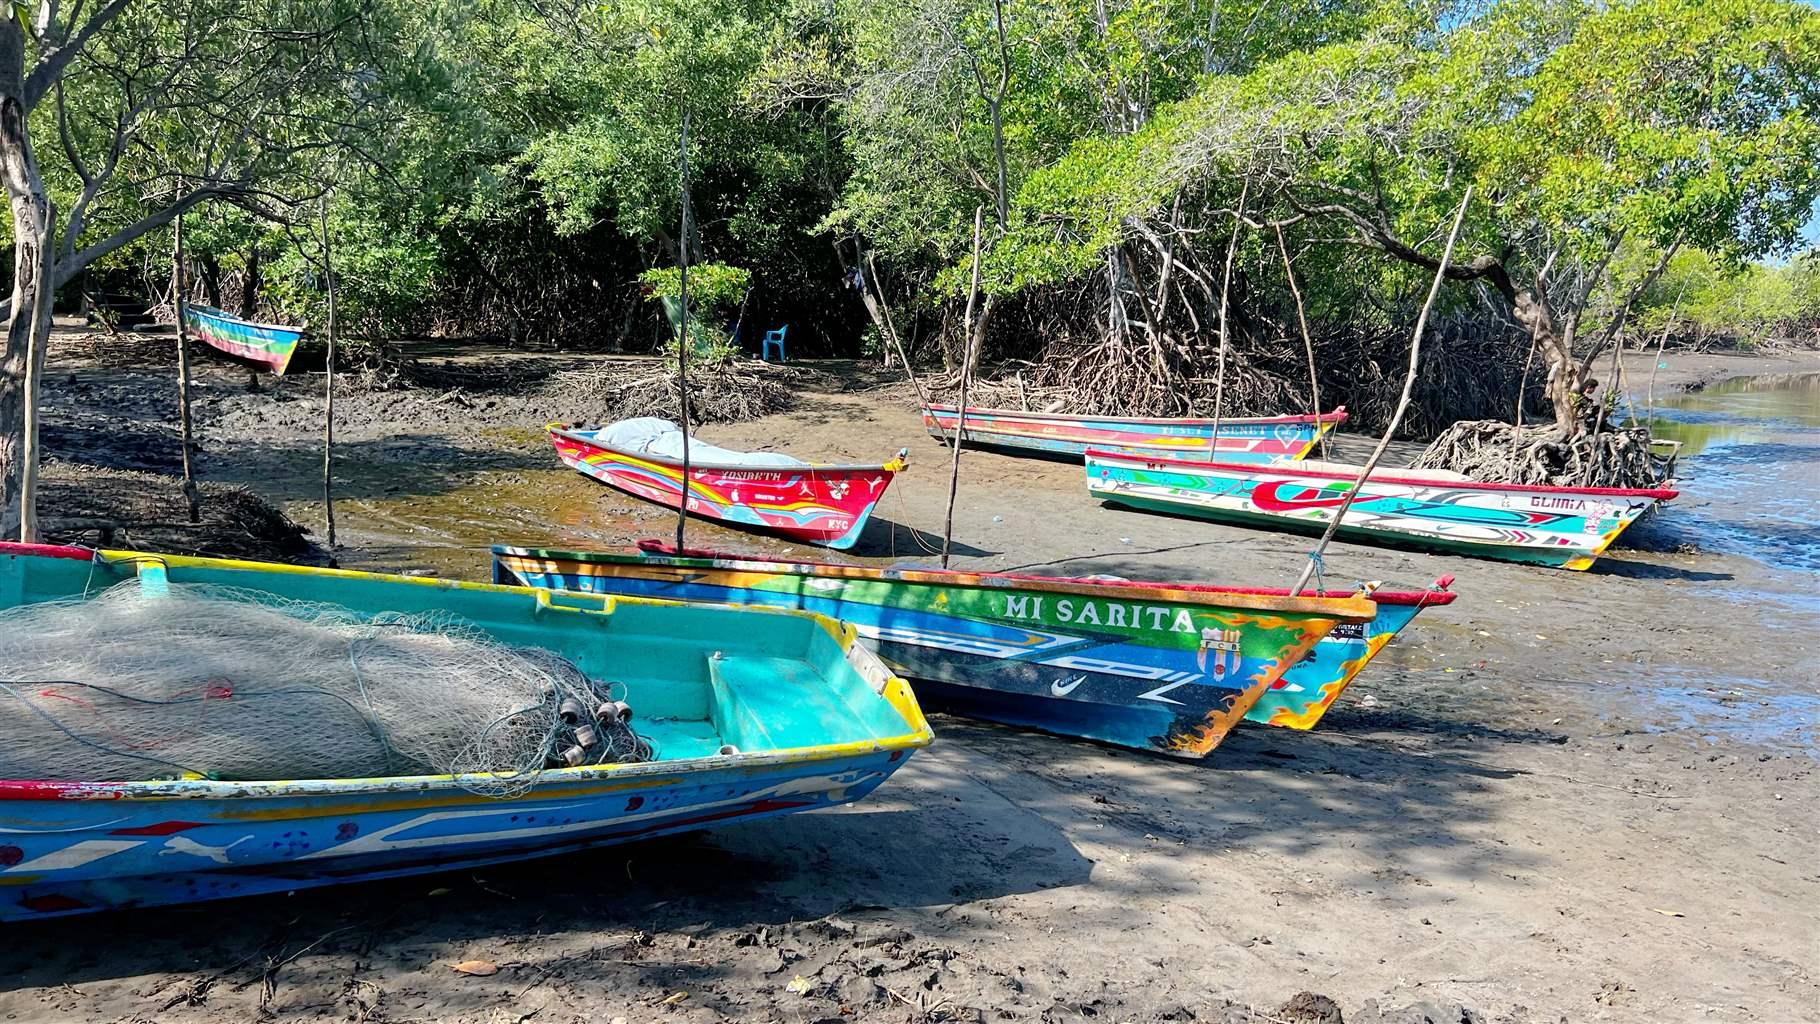 Six multicolored boats—painted in shades of blue, red, yellow, and green—dot wet sand near the river’s shoreline. Mangroves line the shore behind the boats and gently reach toward the blue sky.